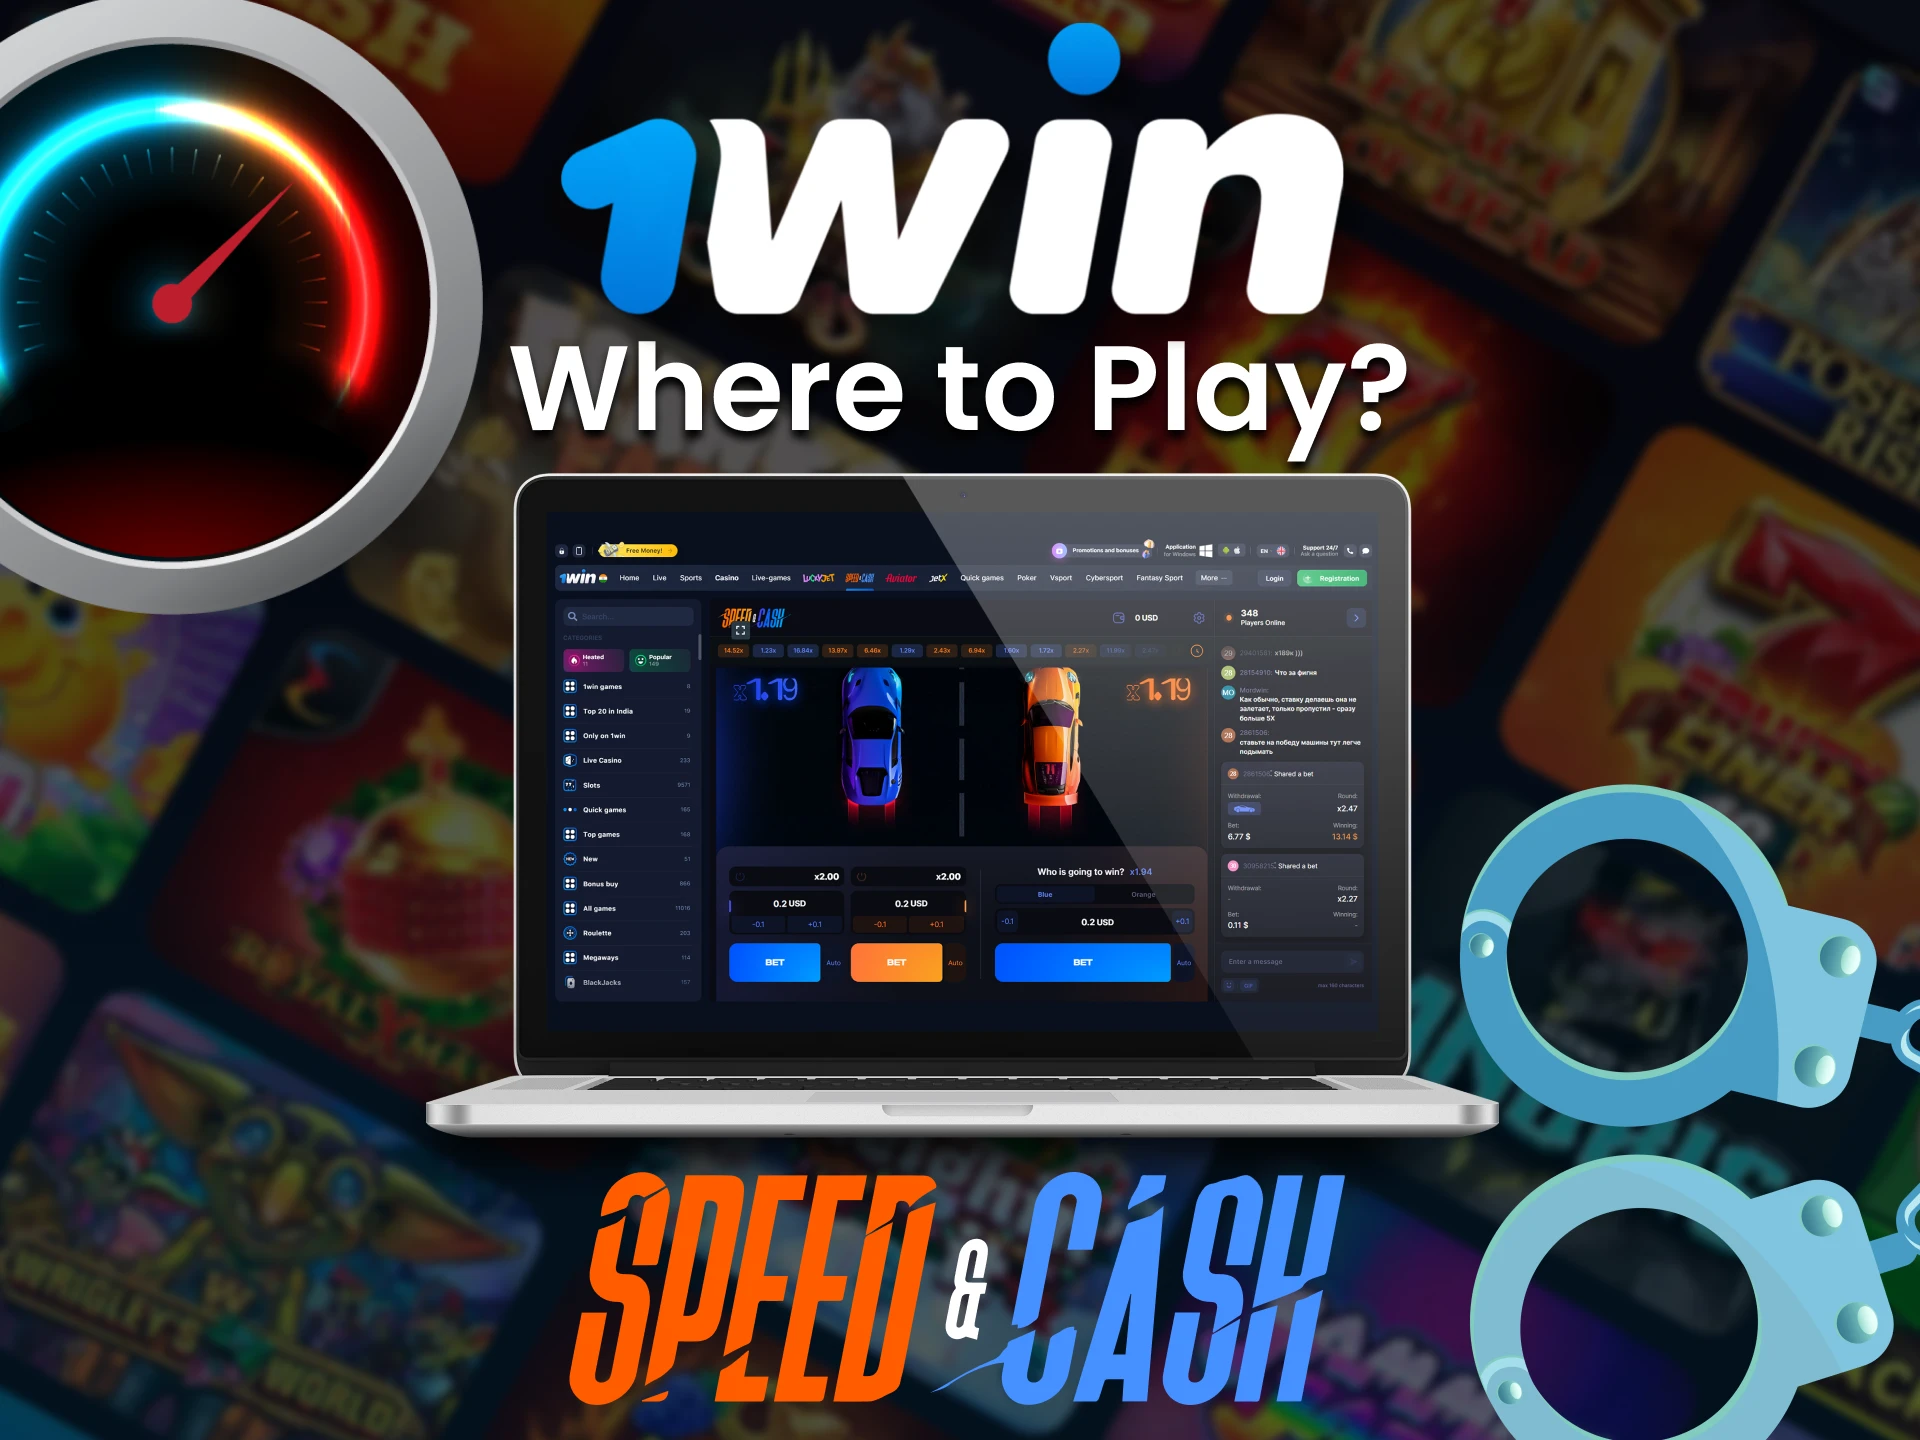 Play 1Win Speed & Cash through the website or download the app for Android or iOS.